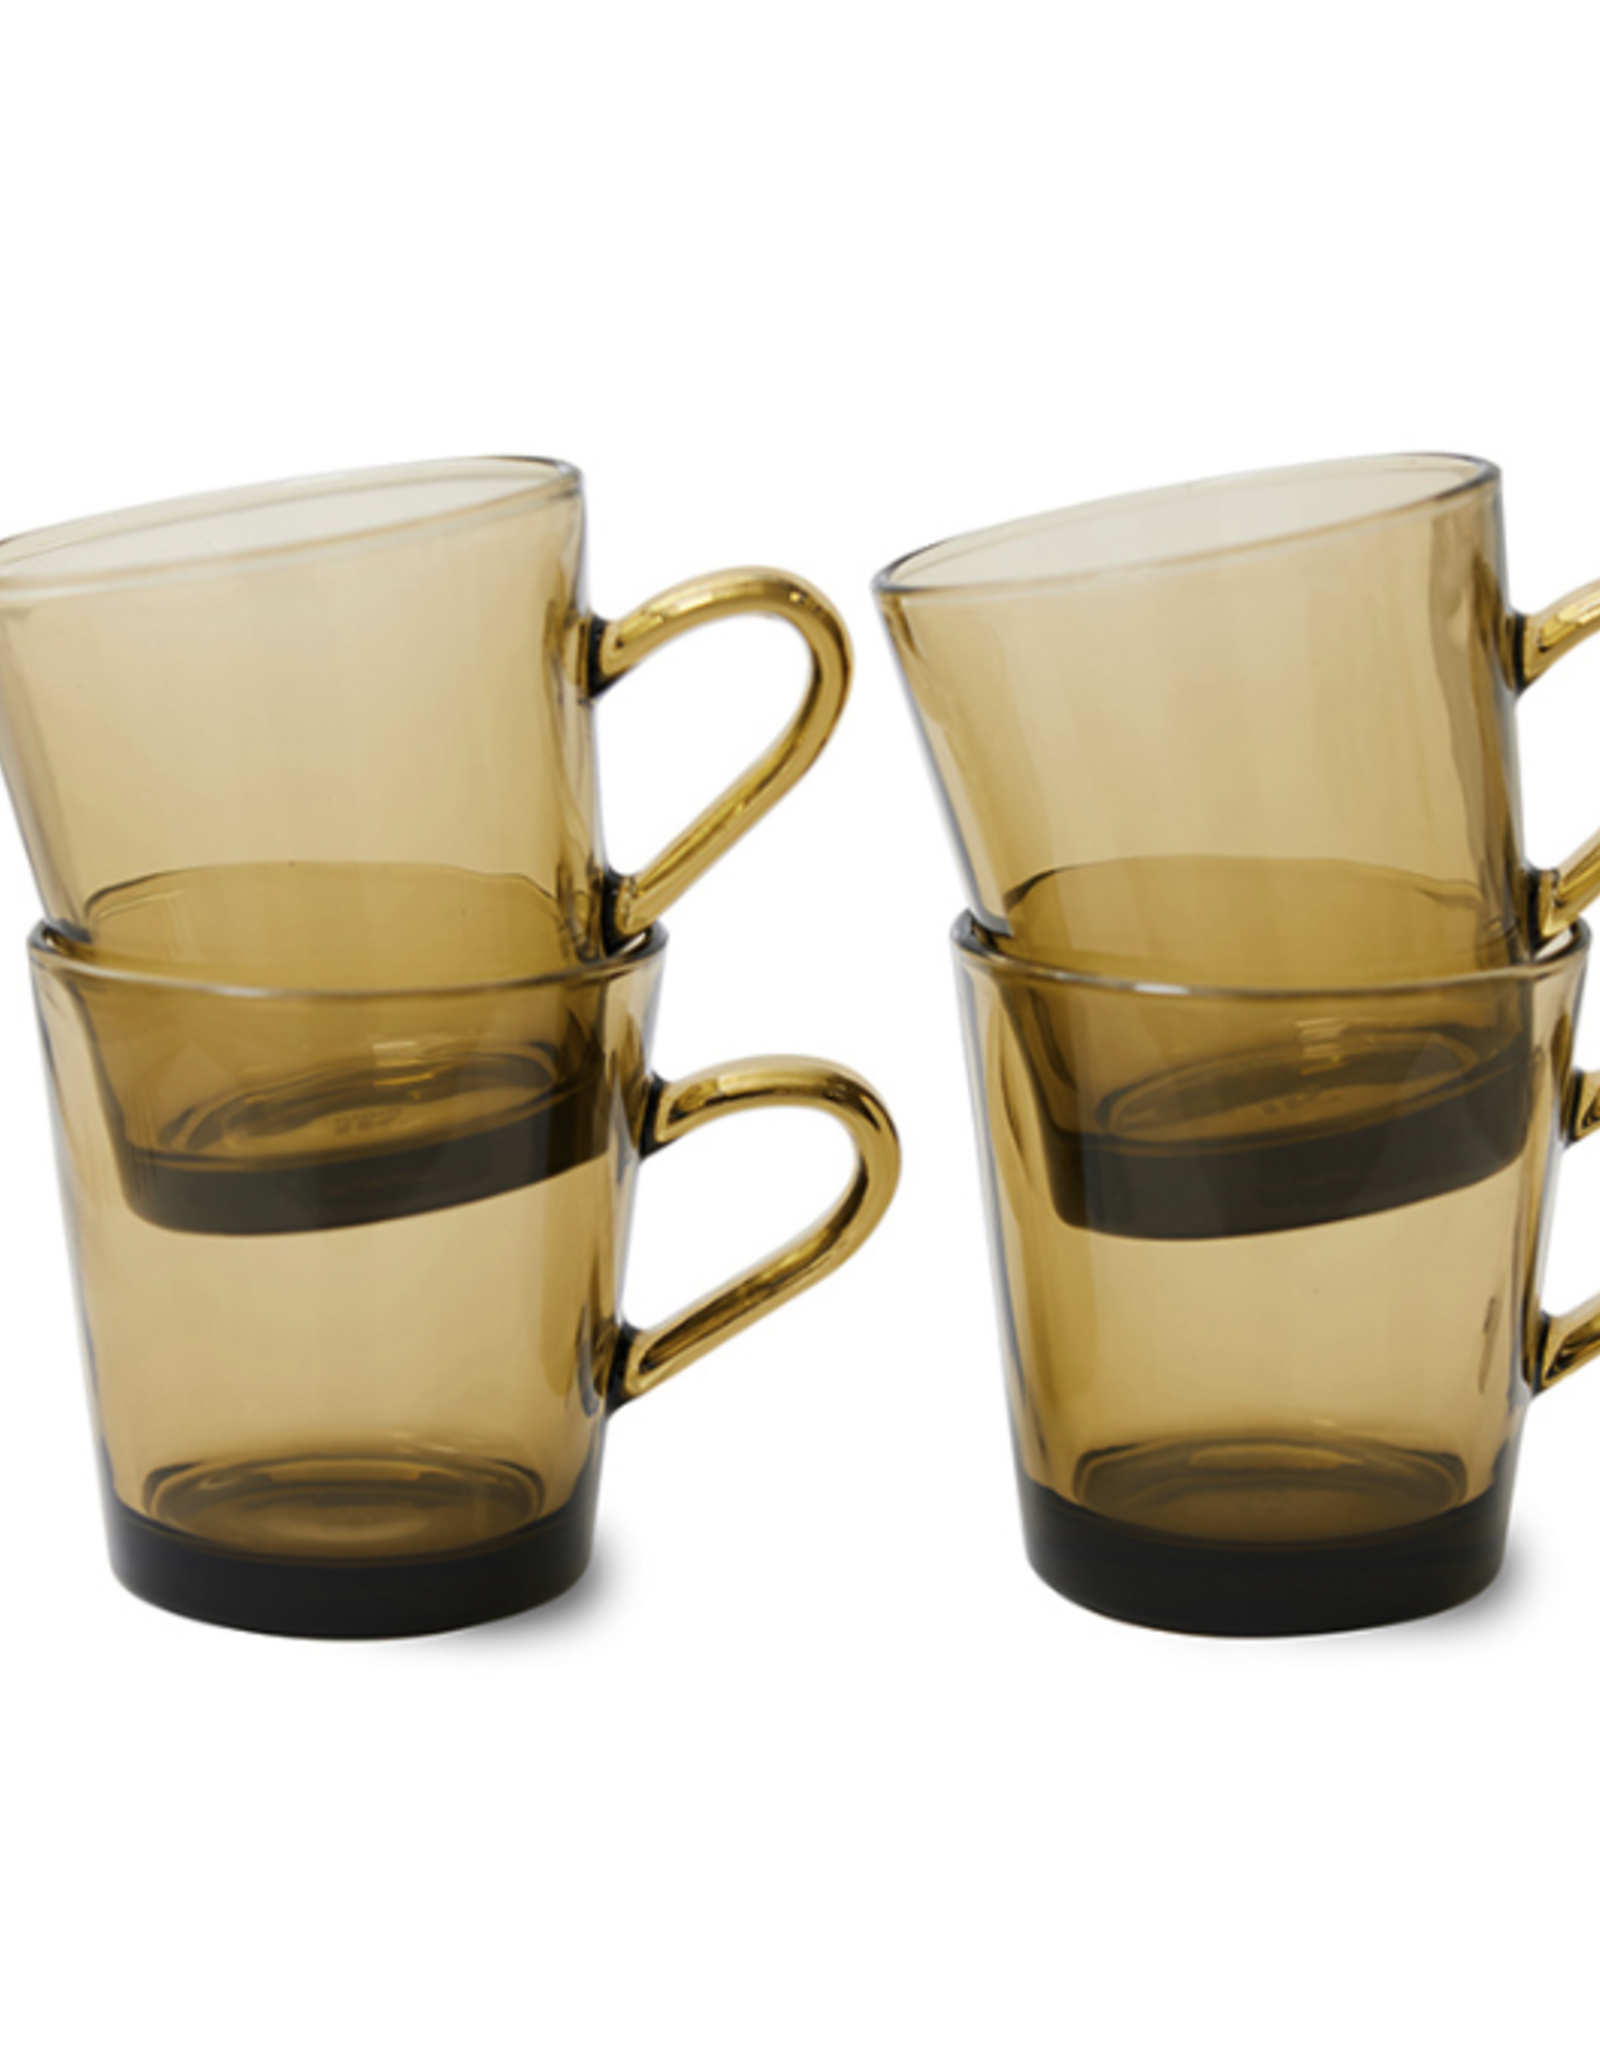 HKliving 70's glassware - coffee cup amber